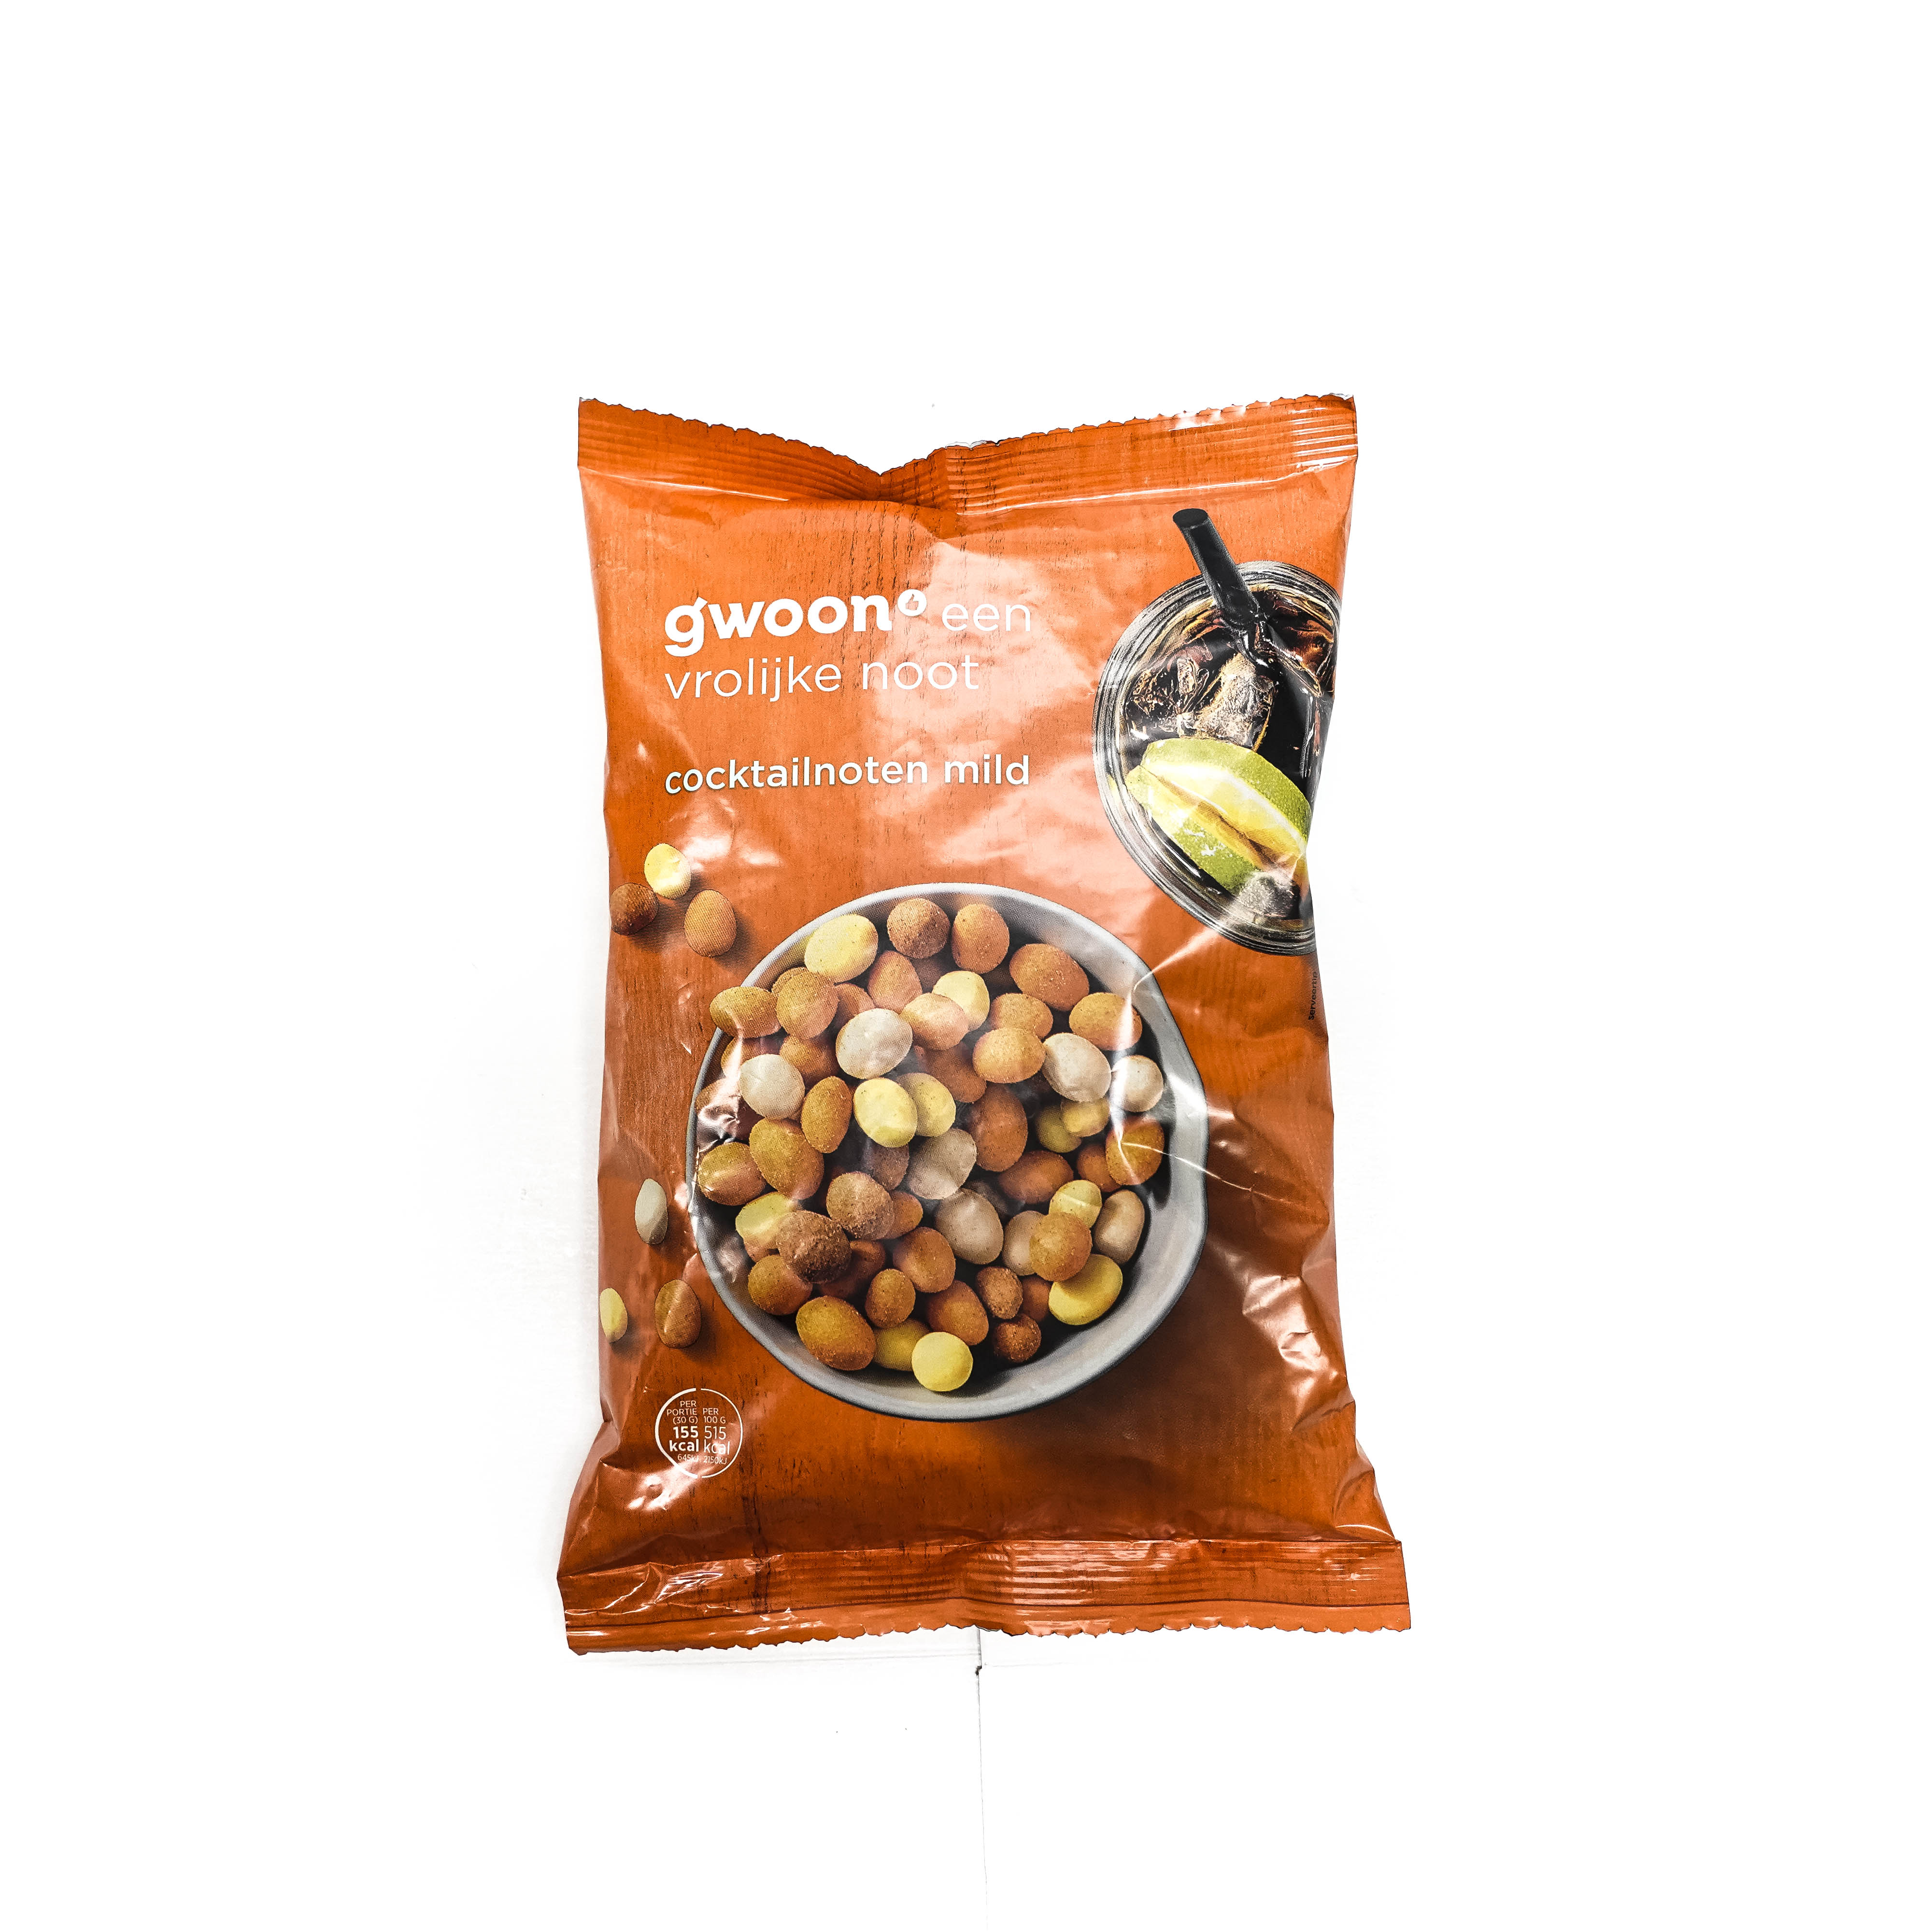 Gwoon Mild Cocktail Coated Peanuts